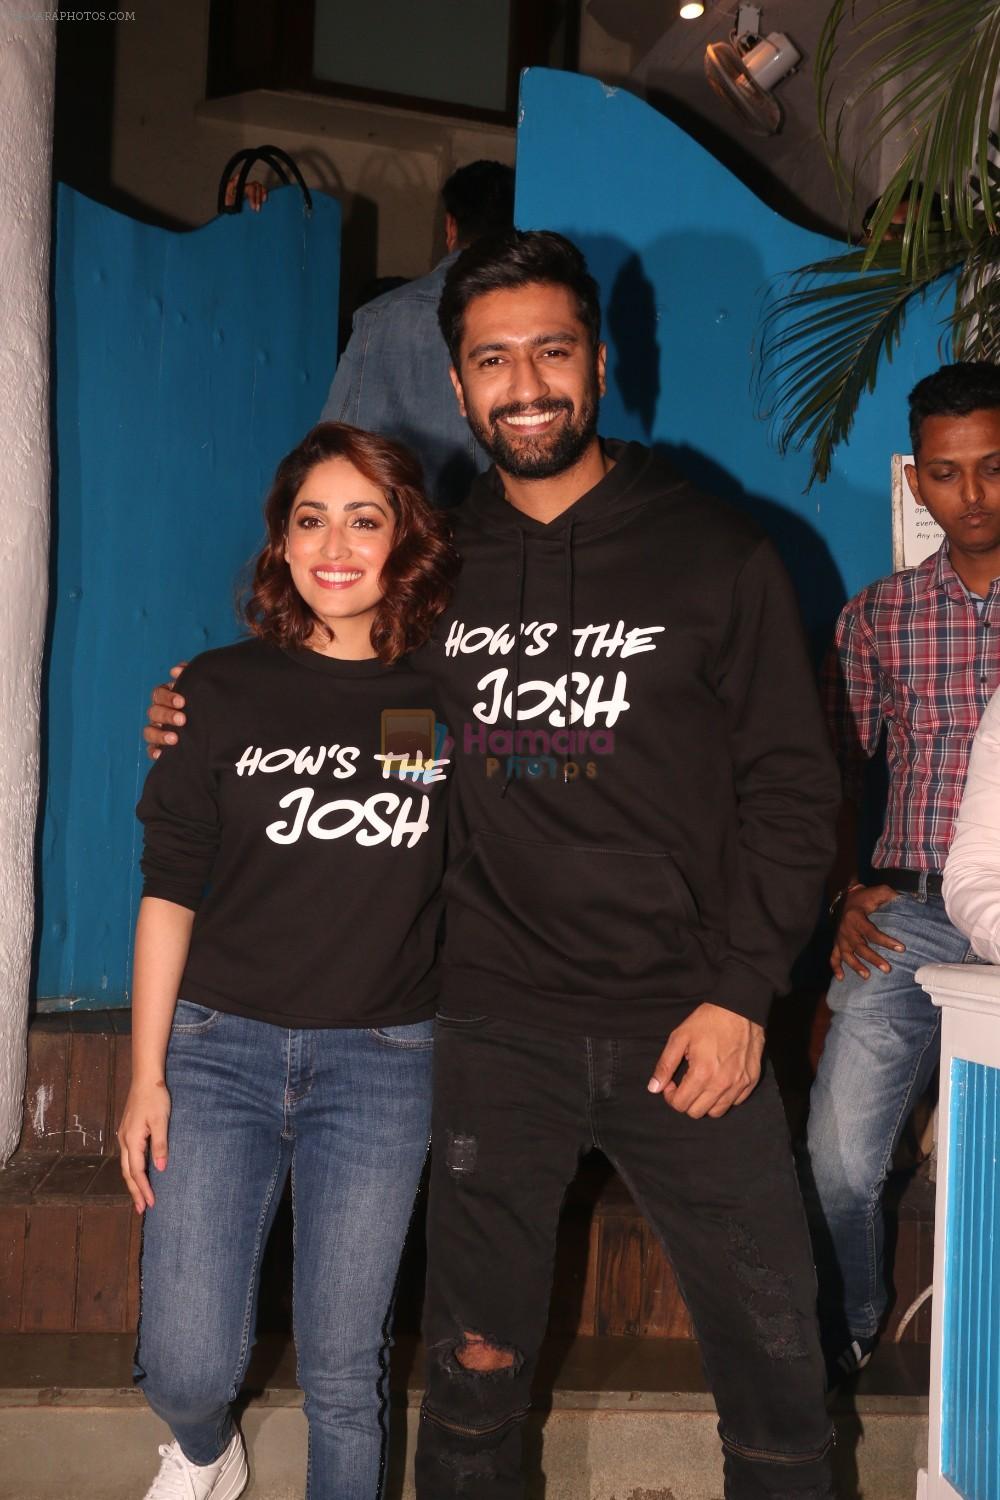 Vicky Kaushal, Yami Gautam at the Success party of film Uri in Olive, bandra on 16th Jan 2019